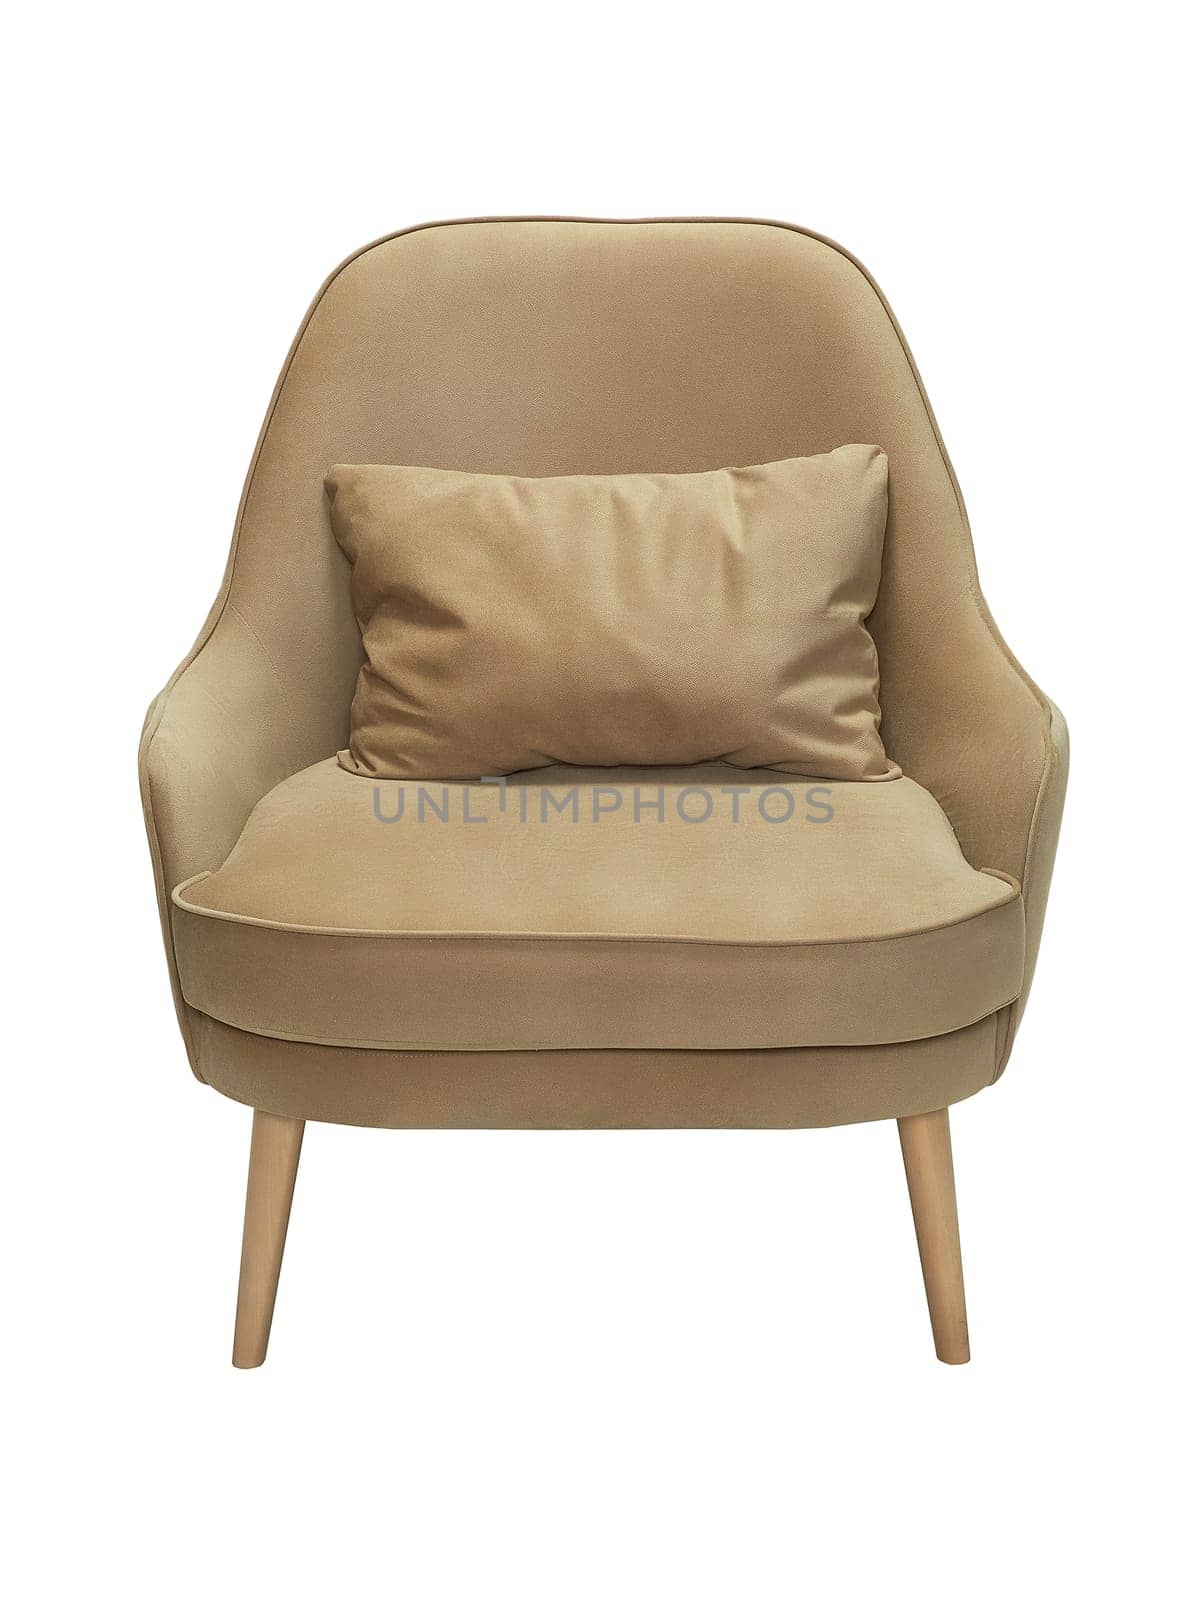 modern beige fabric armchair with wooden legs isolated on white background, front view by artemzatsepilin